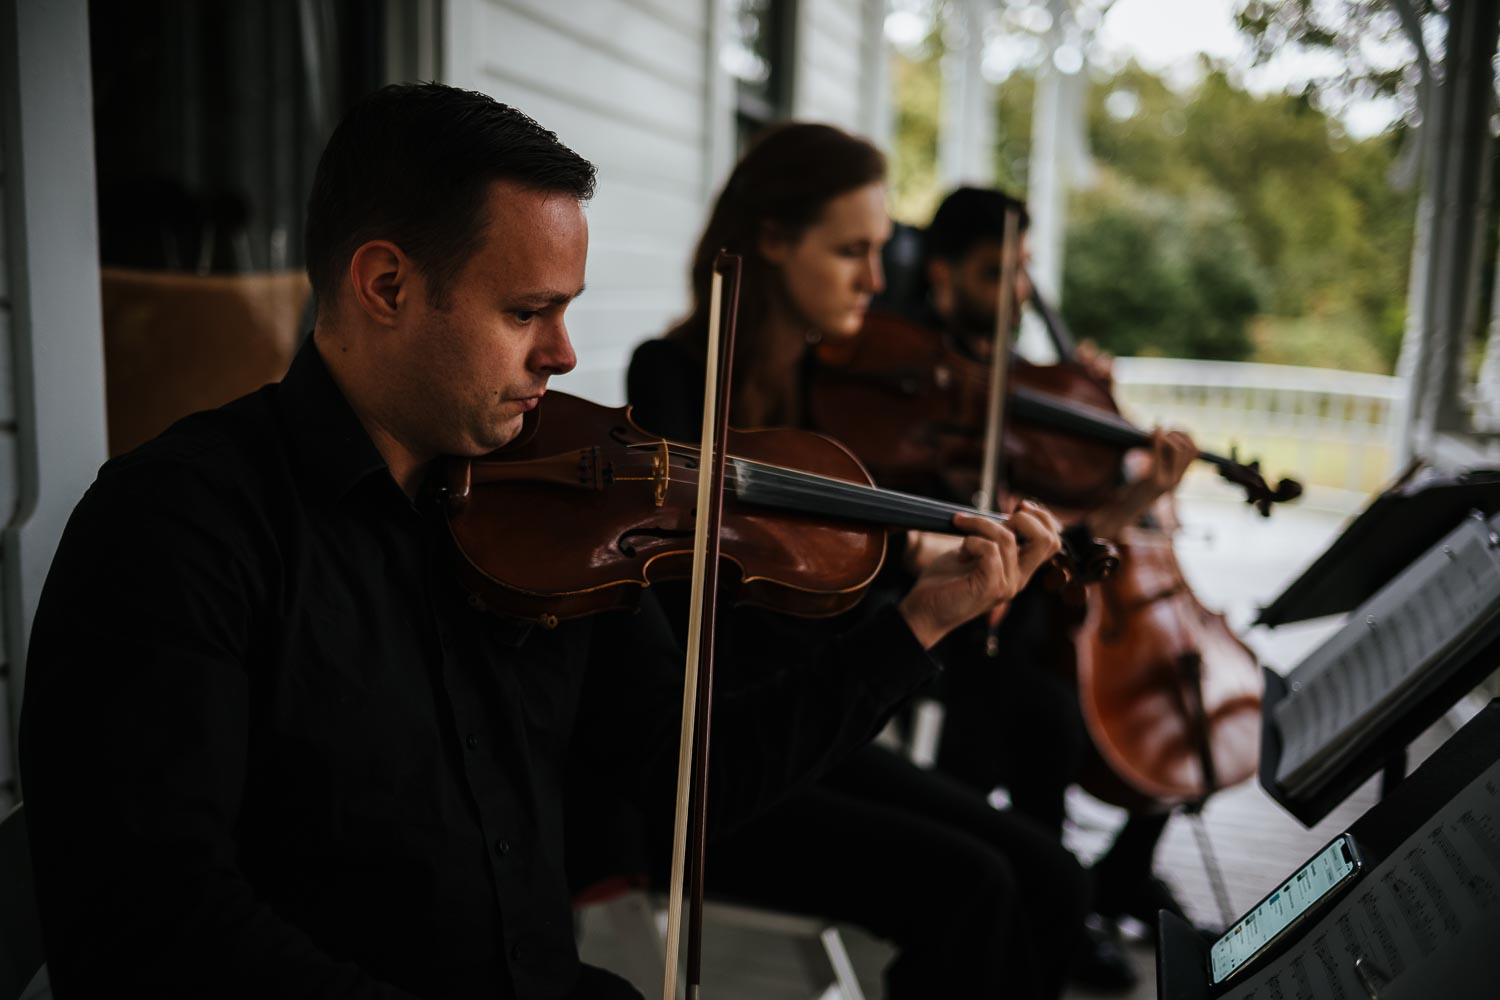 Violinists start playing prelude at a Jewish wedding outdoors at Barr Mansion, Texas